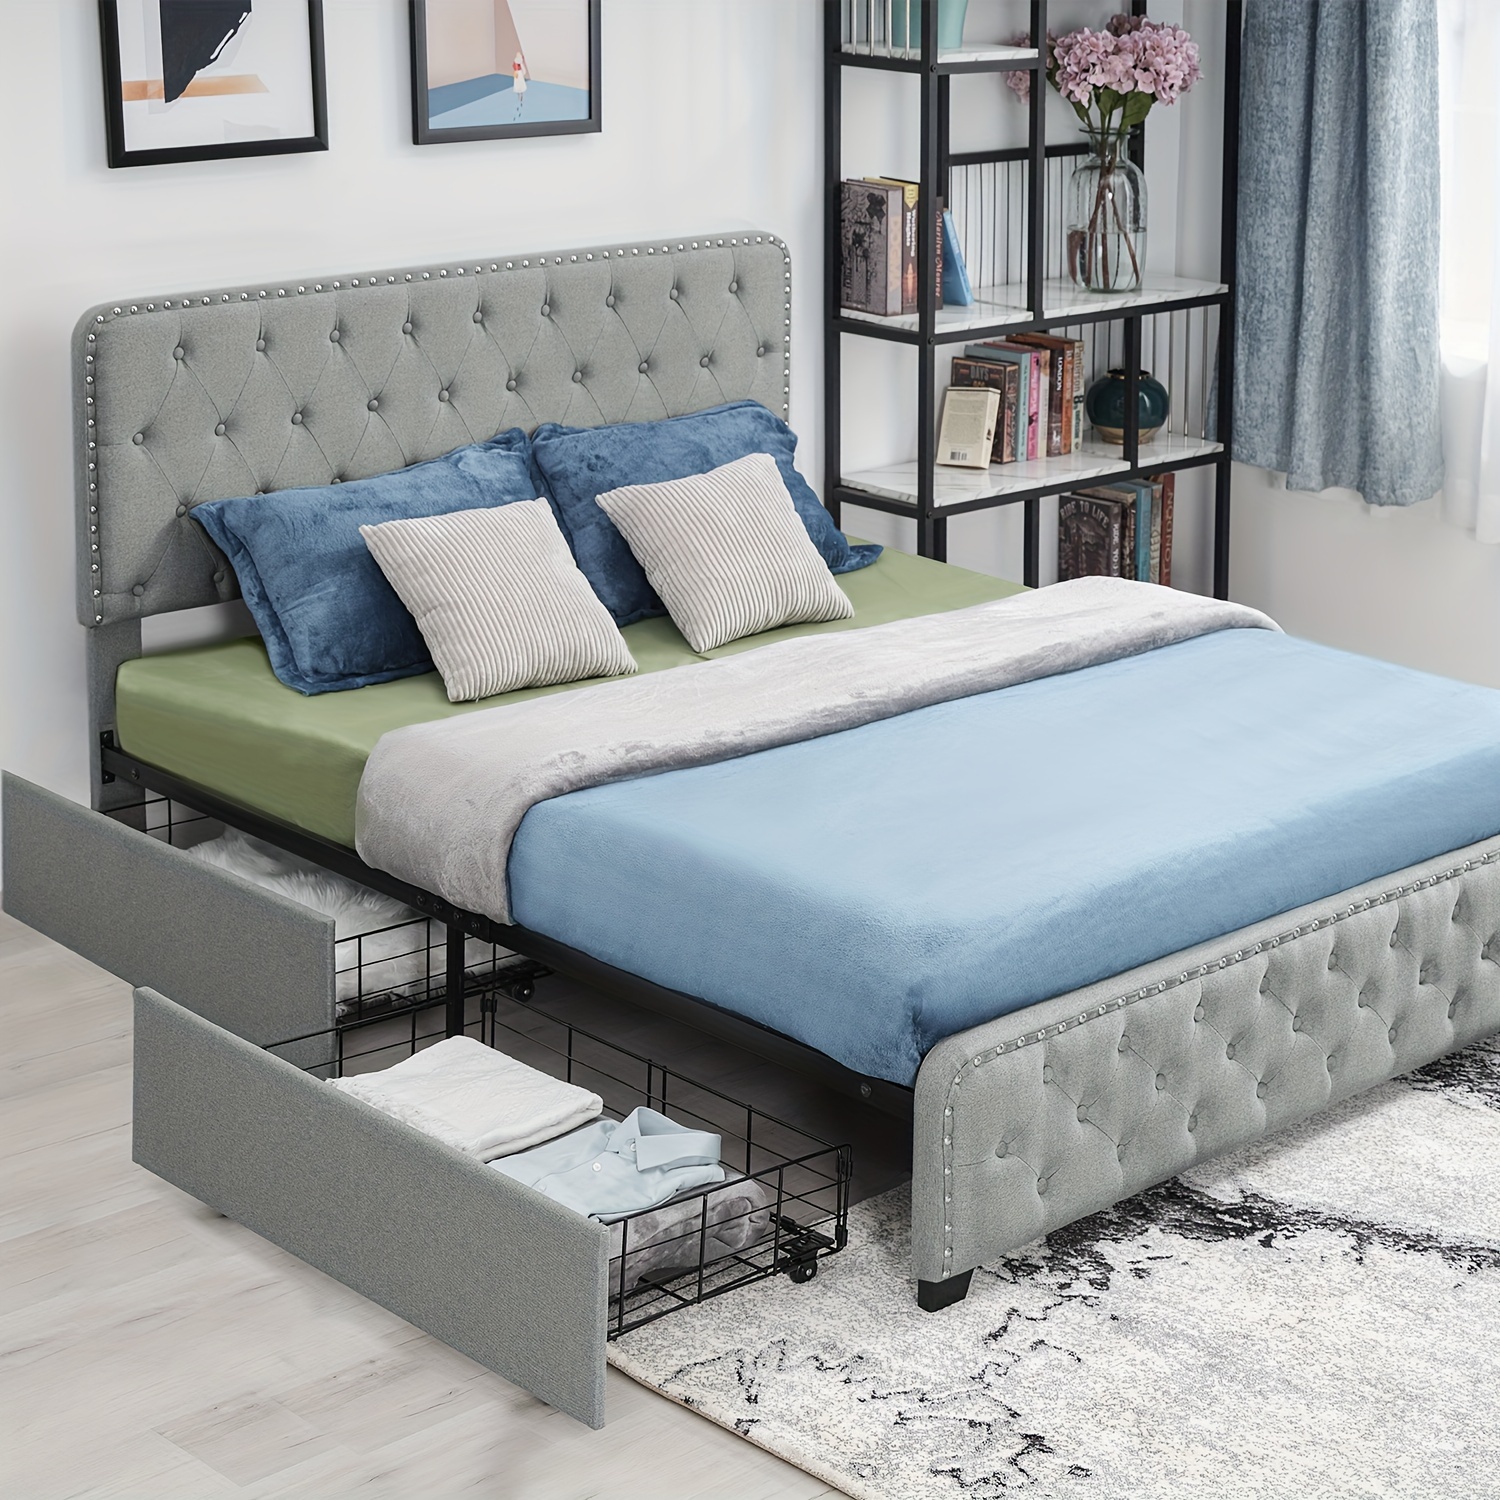 

1 Piece Upholstered Queen Bed Frame - Queen Metal Bed Frame With 4 Storage Drawers And Headboard, Button Tufted, Heavy Duty Modern Fabric Bedroom Platform Bed Frame No Springs Needed, Gray